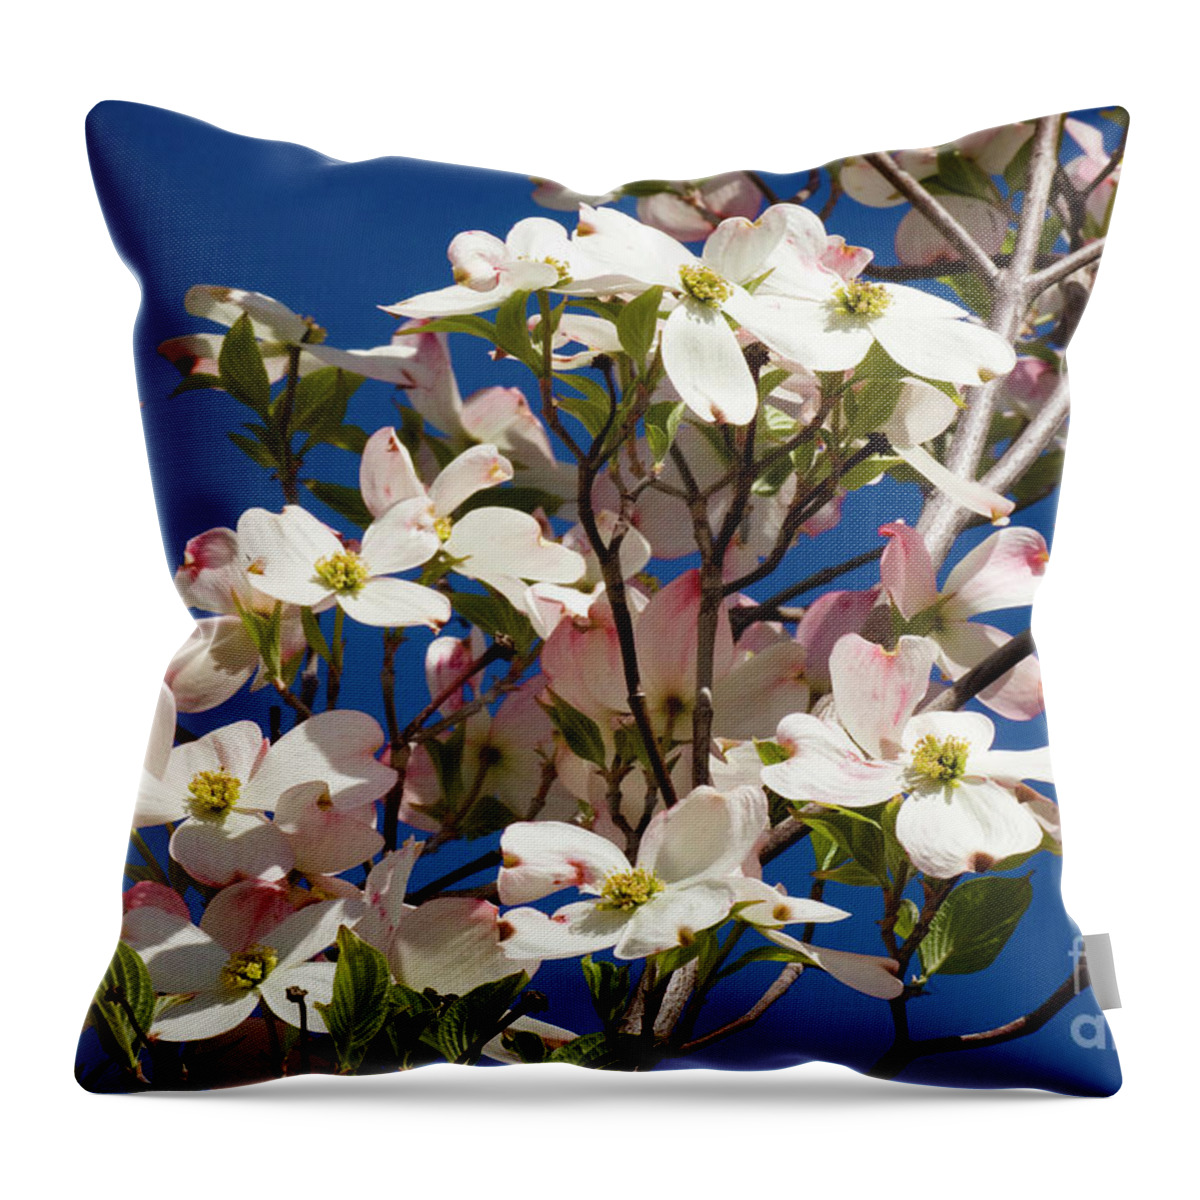 Dogwood Throw Pillow featuring the photograph Dogwood Sky by Jim And Emily Bush